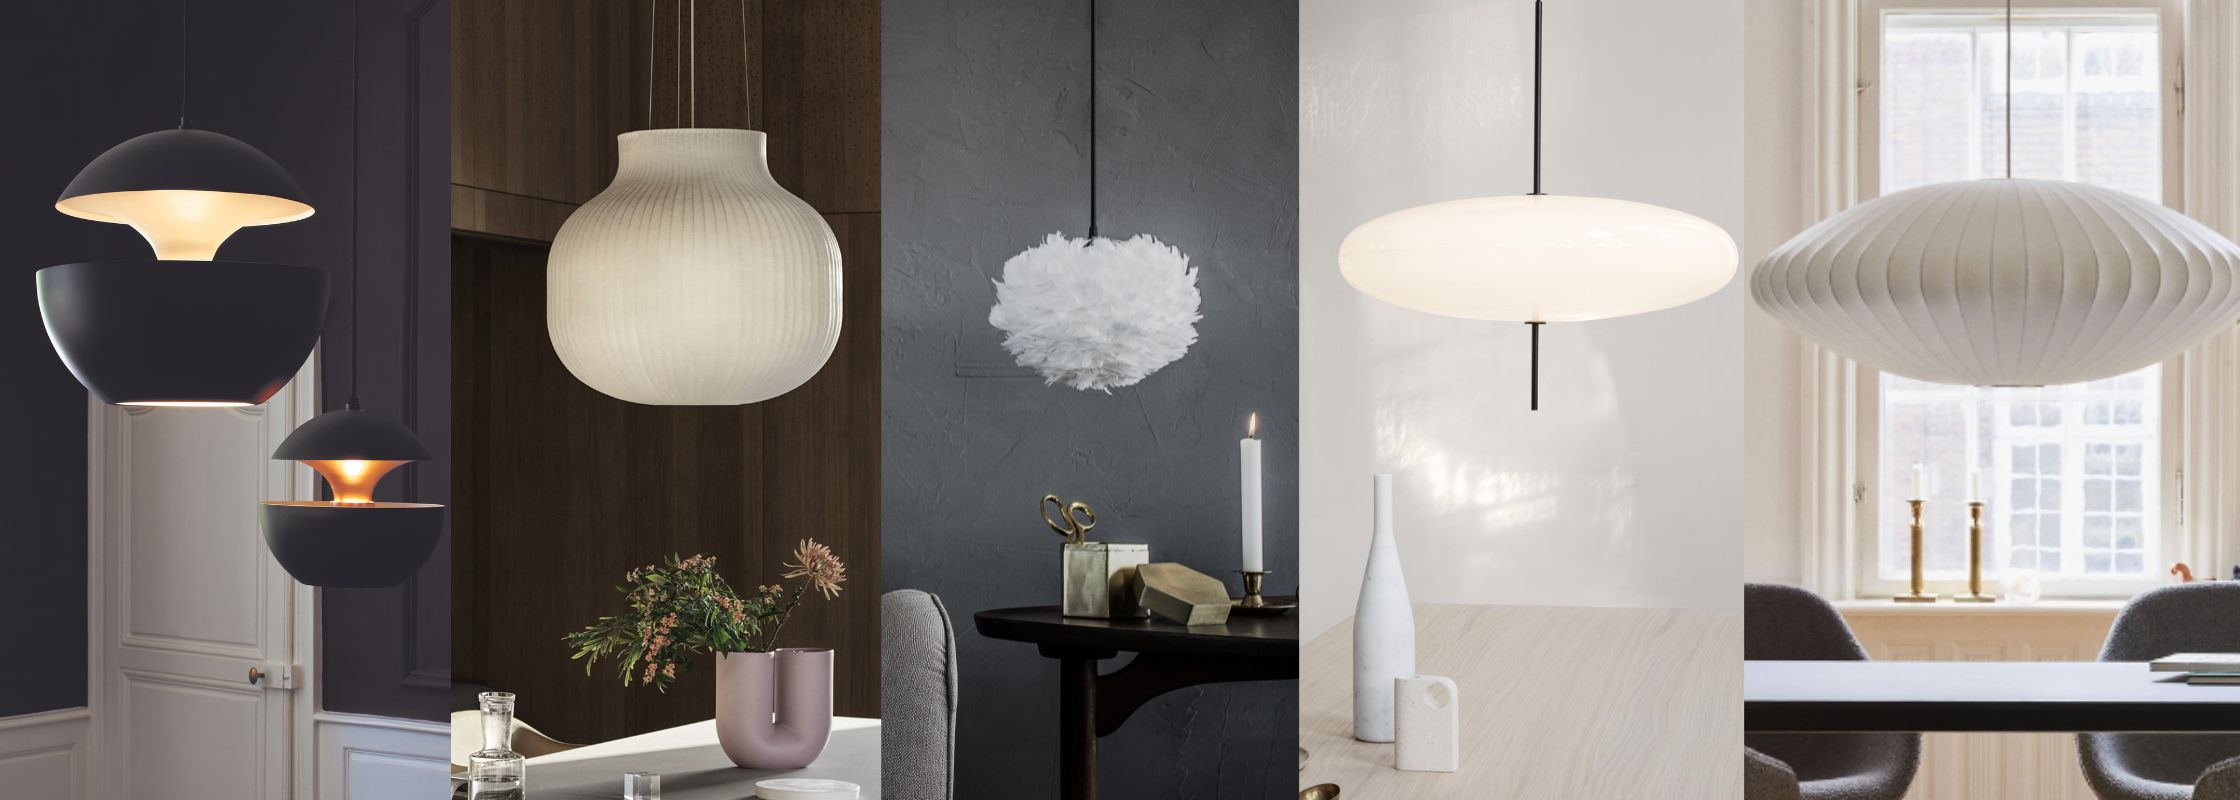 Top 15 pendants for the home